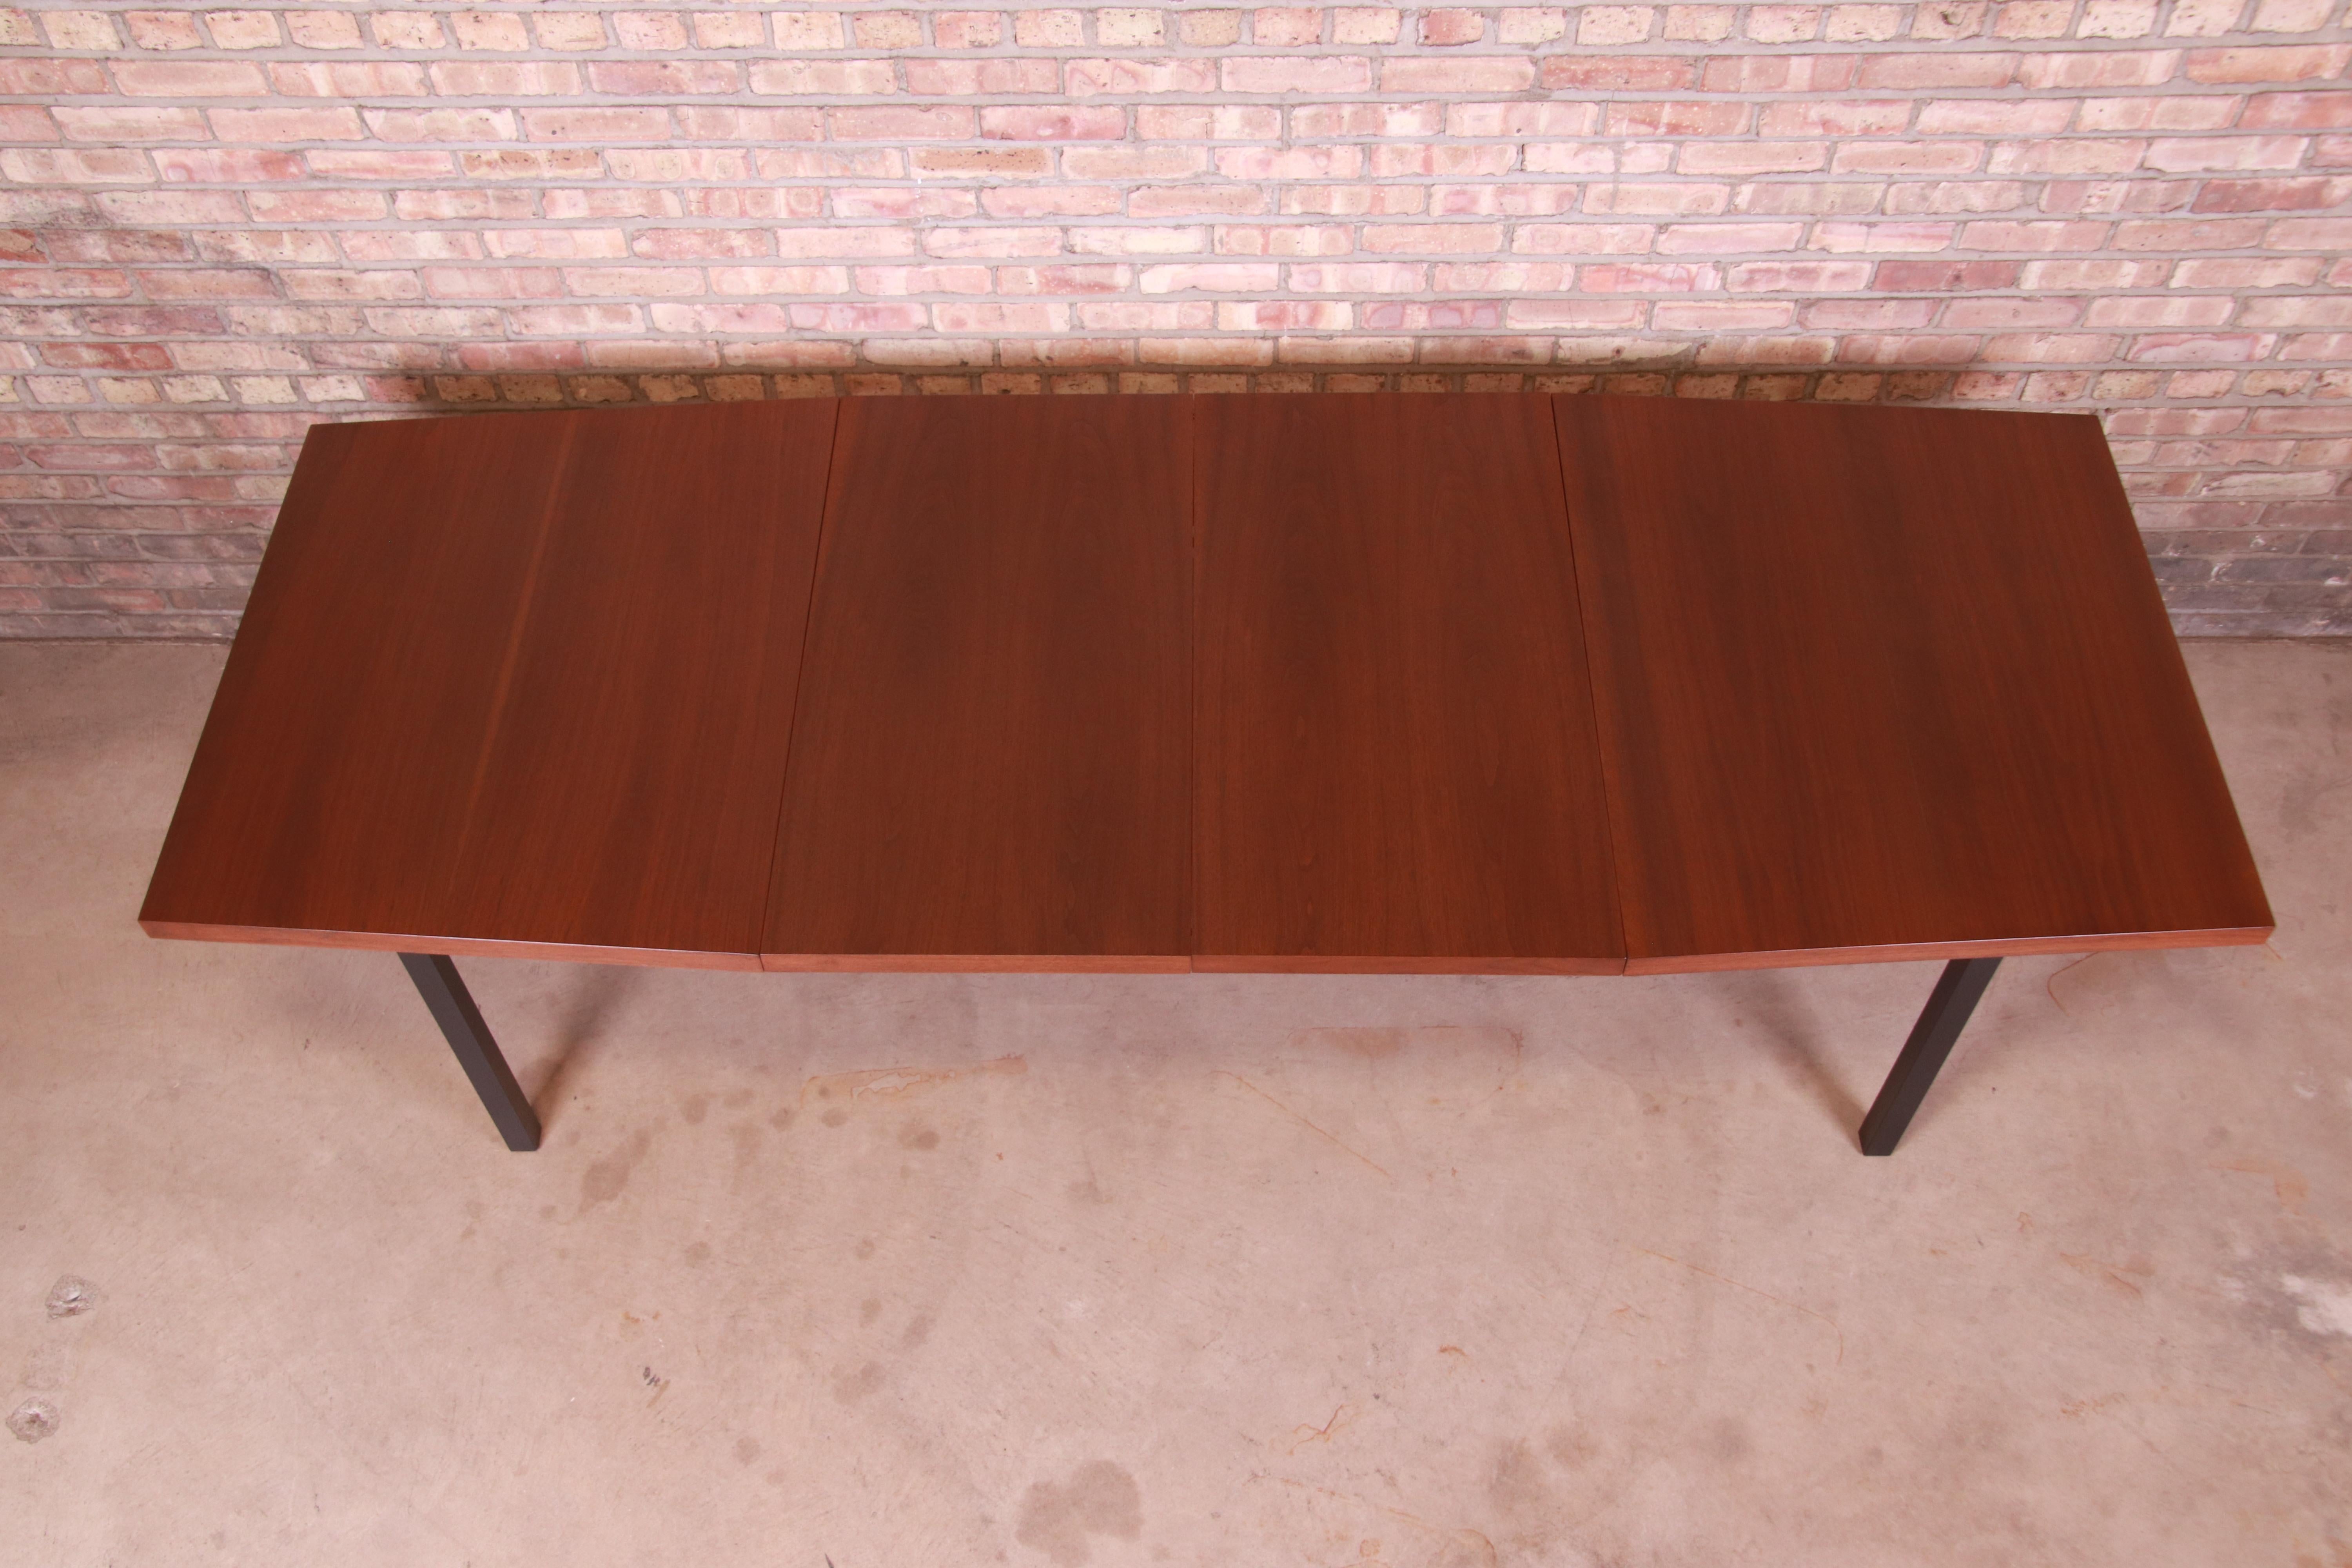 Mid-20th Century Milo Baughman for Directional Walnut Boat-Shaped Dining Table, Newly Refinished For Sale